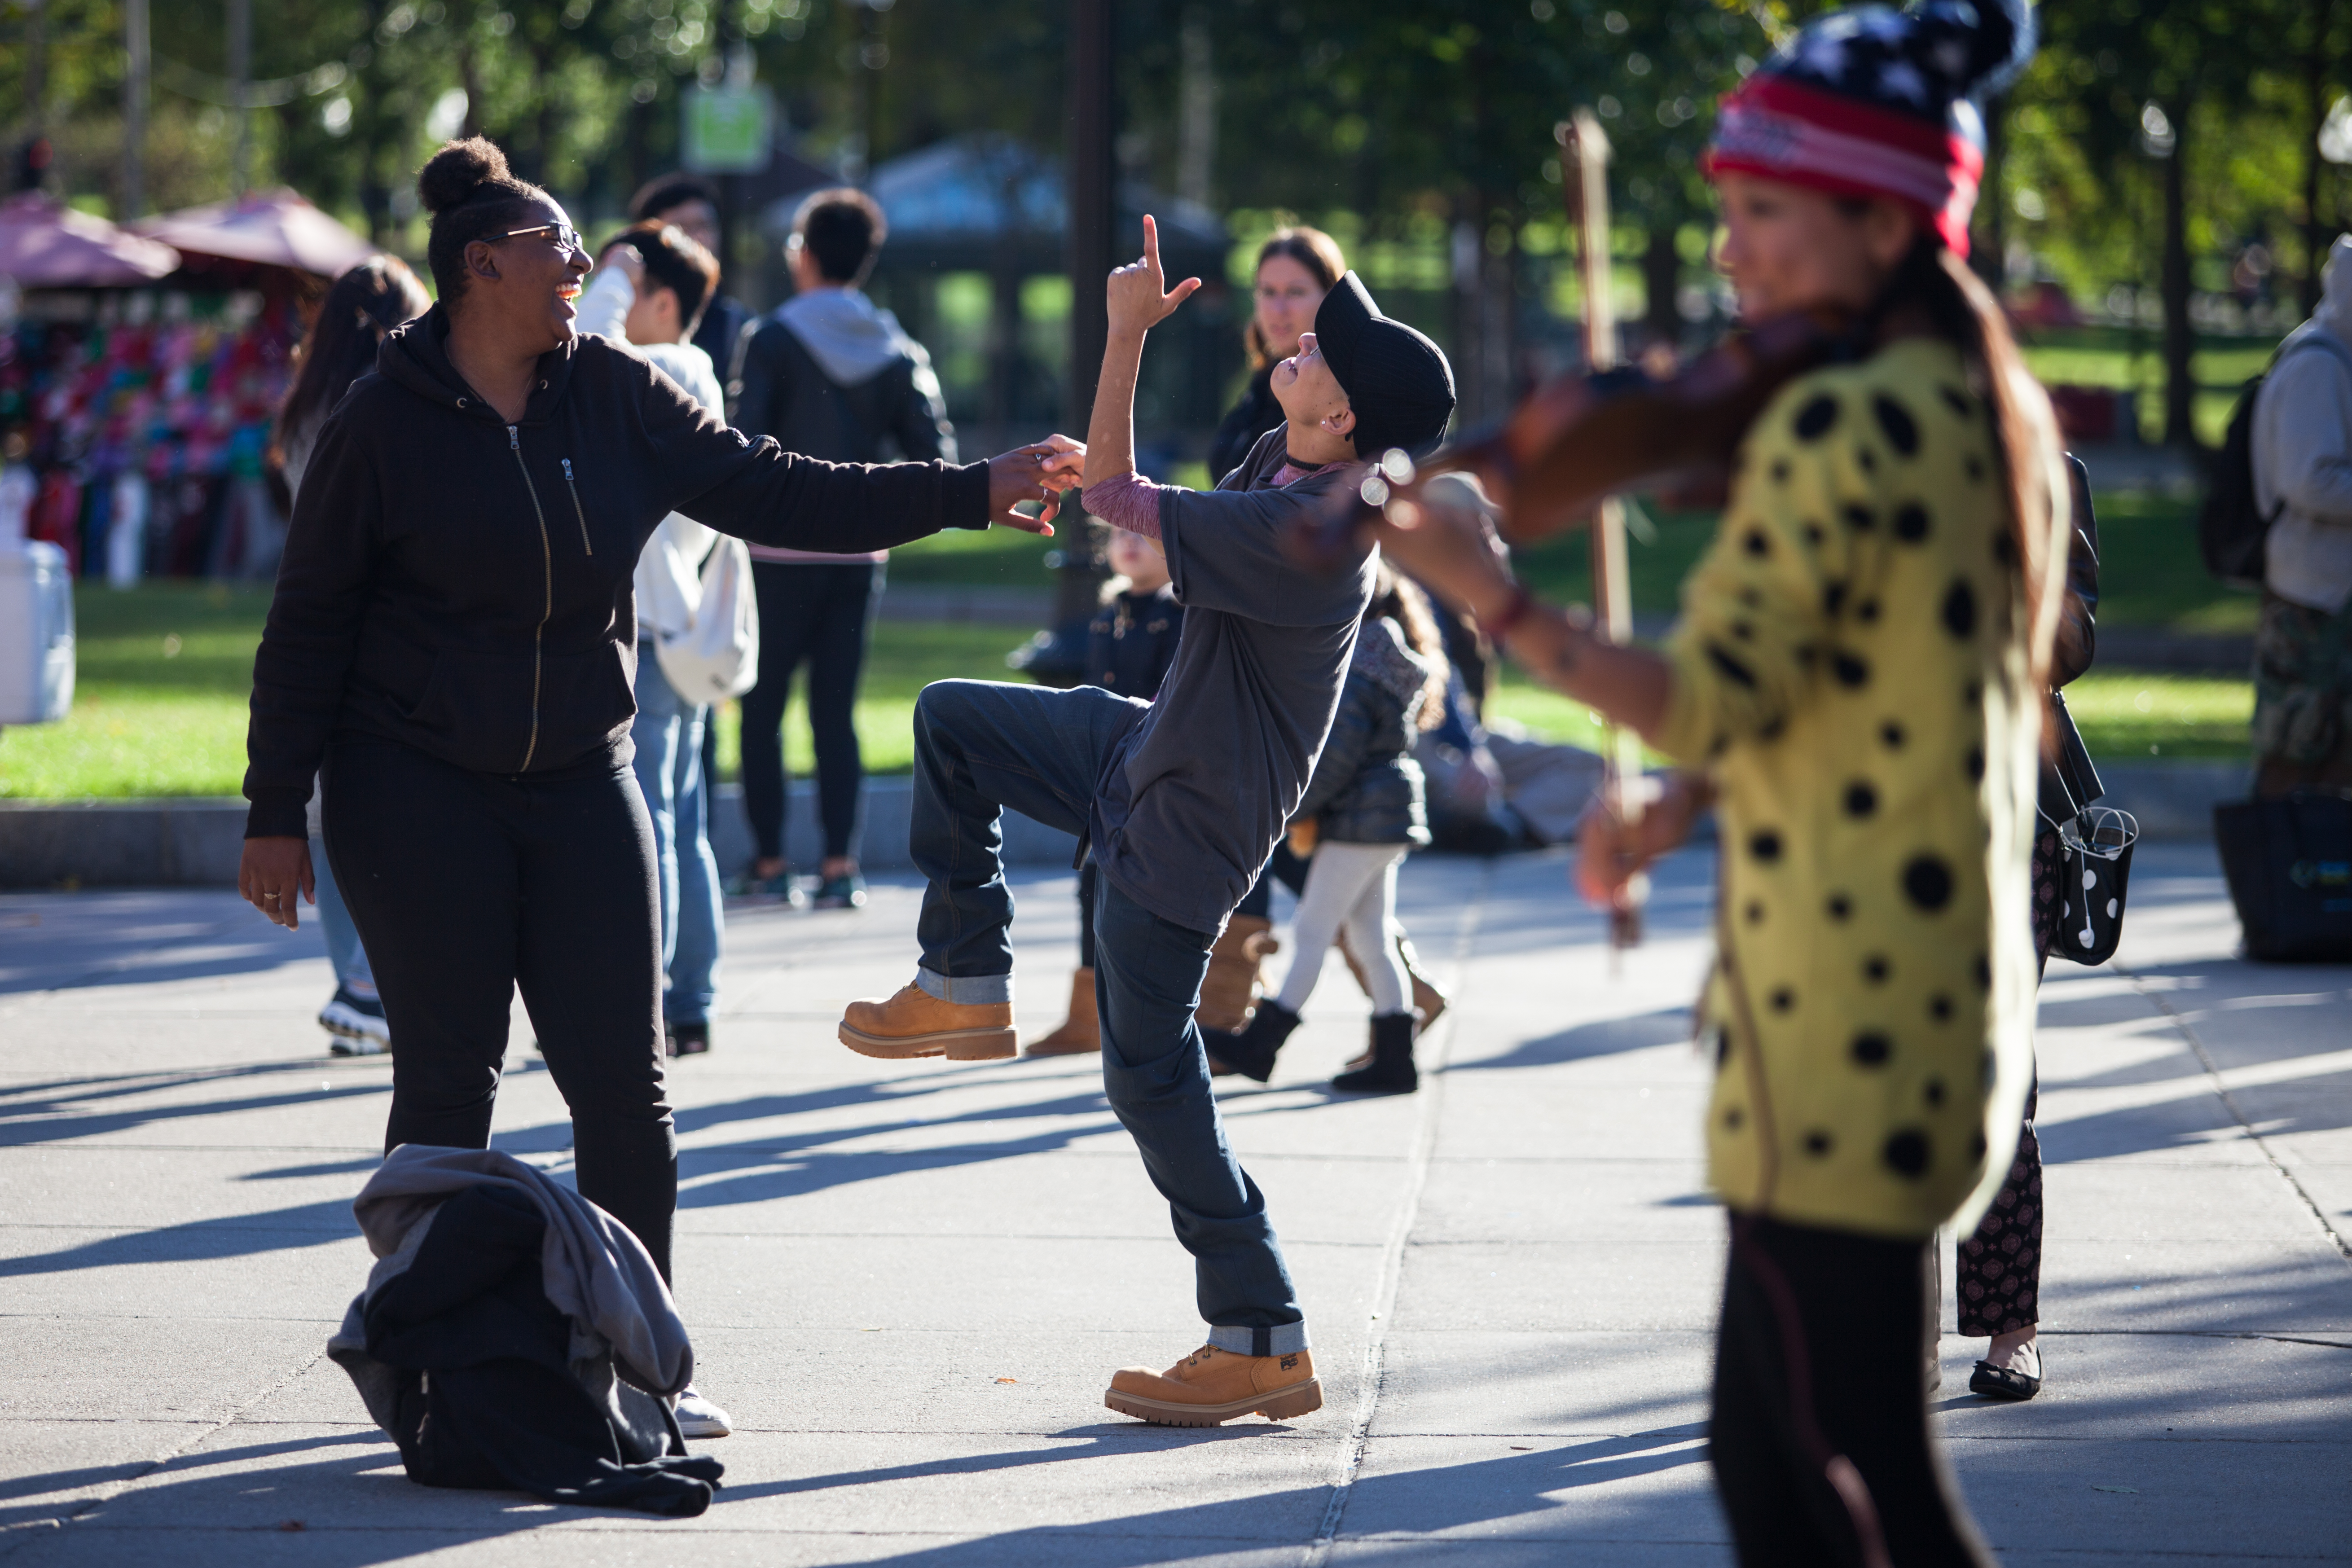 Liniște, right, a 22-year-old gay woman experiencing homelessness, dances with her girlfriend Tay during a violin performance in the Boston Common. Liniște and Tay say they have seen this performer, known as ViolinViiv on social media, in the past and have enjoyed dancing to her performances. "When things get too much, I dance," Liniște says. Photo by Mike DeSocio.